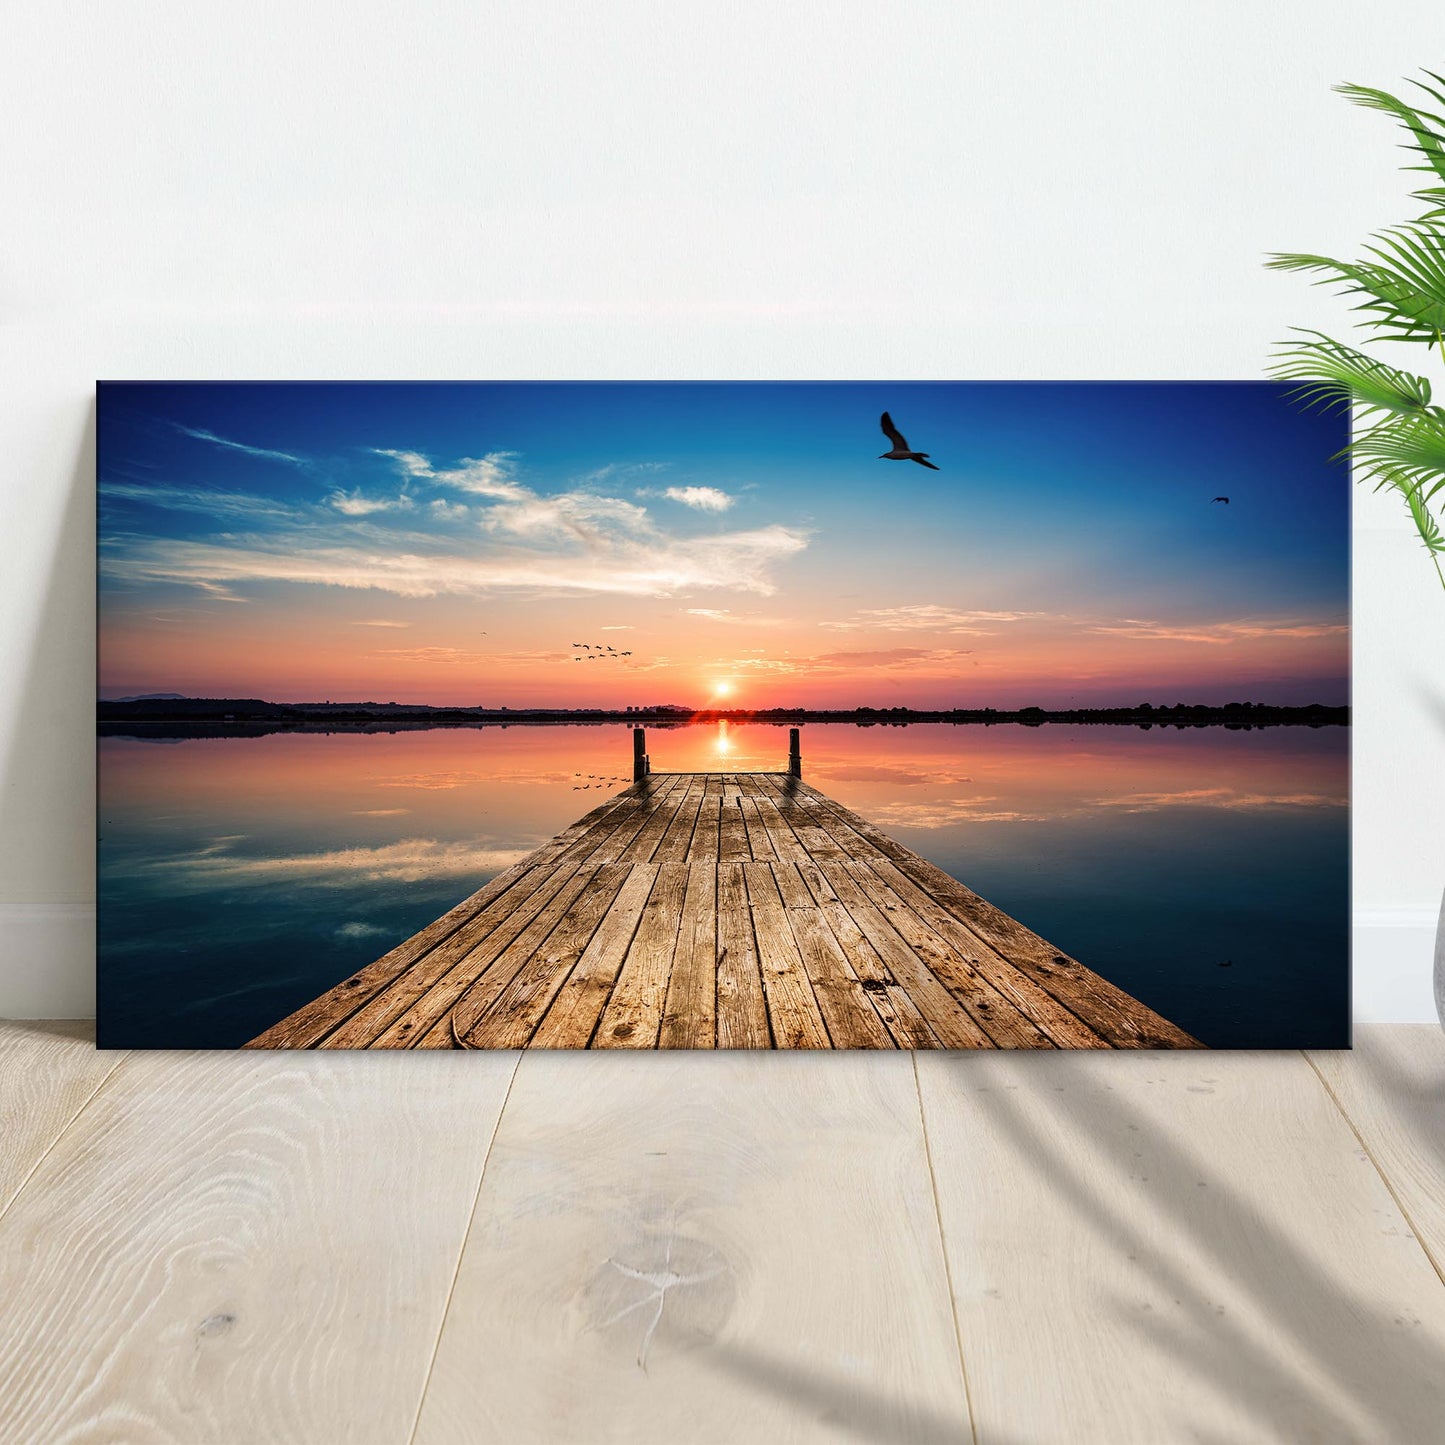 Sunset View At Beach Pier Canvas Wall Art - Image by Tailored Canvases